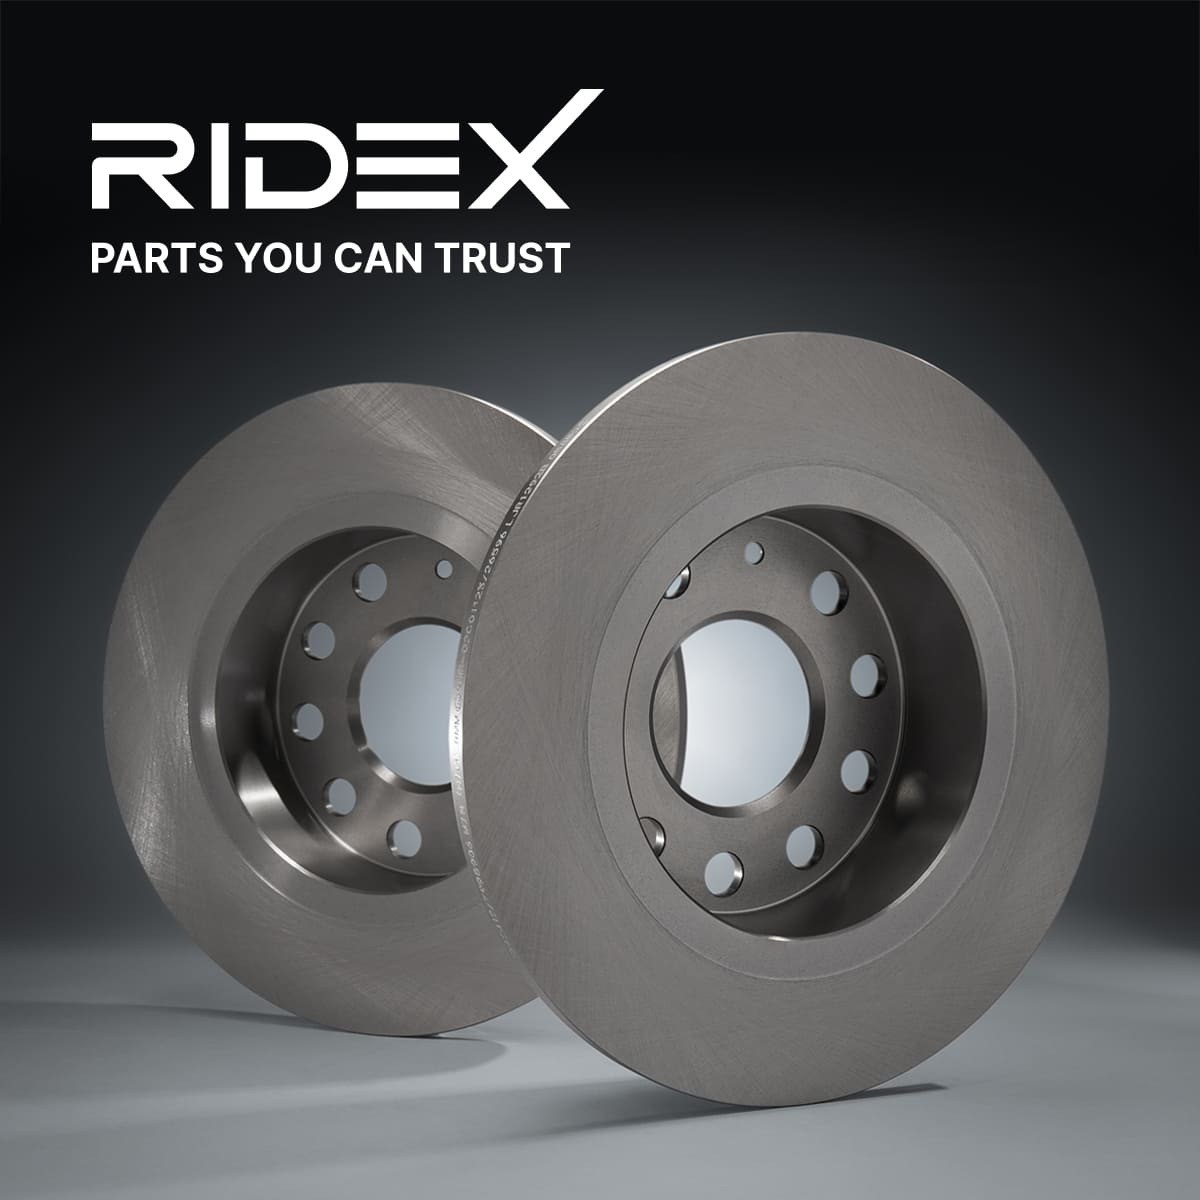 82B0389 Brake discs 82B0389 RIDEX Front Axle, 241,0x18mm, 04/06x100, internally vented, Uncoated